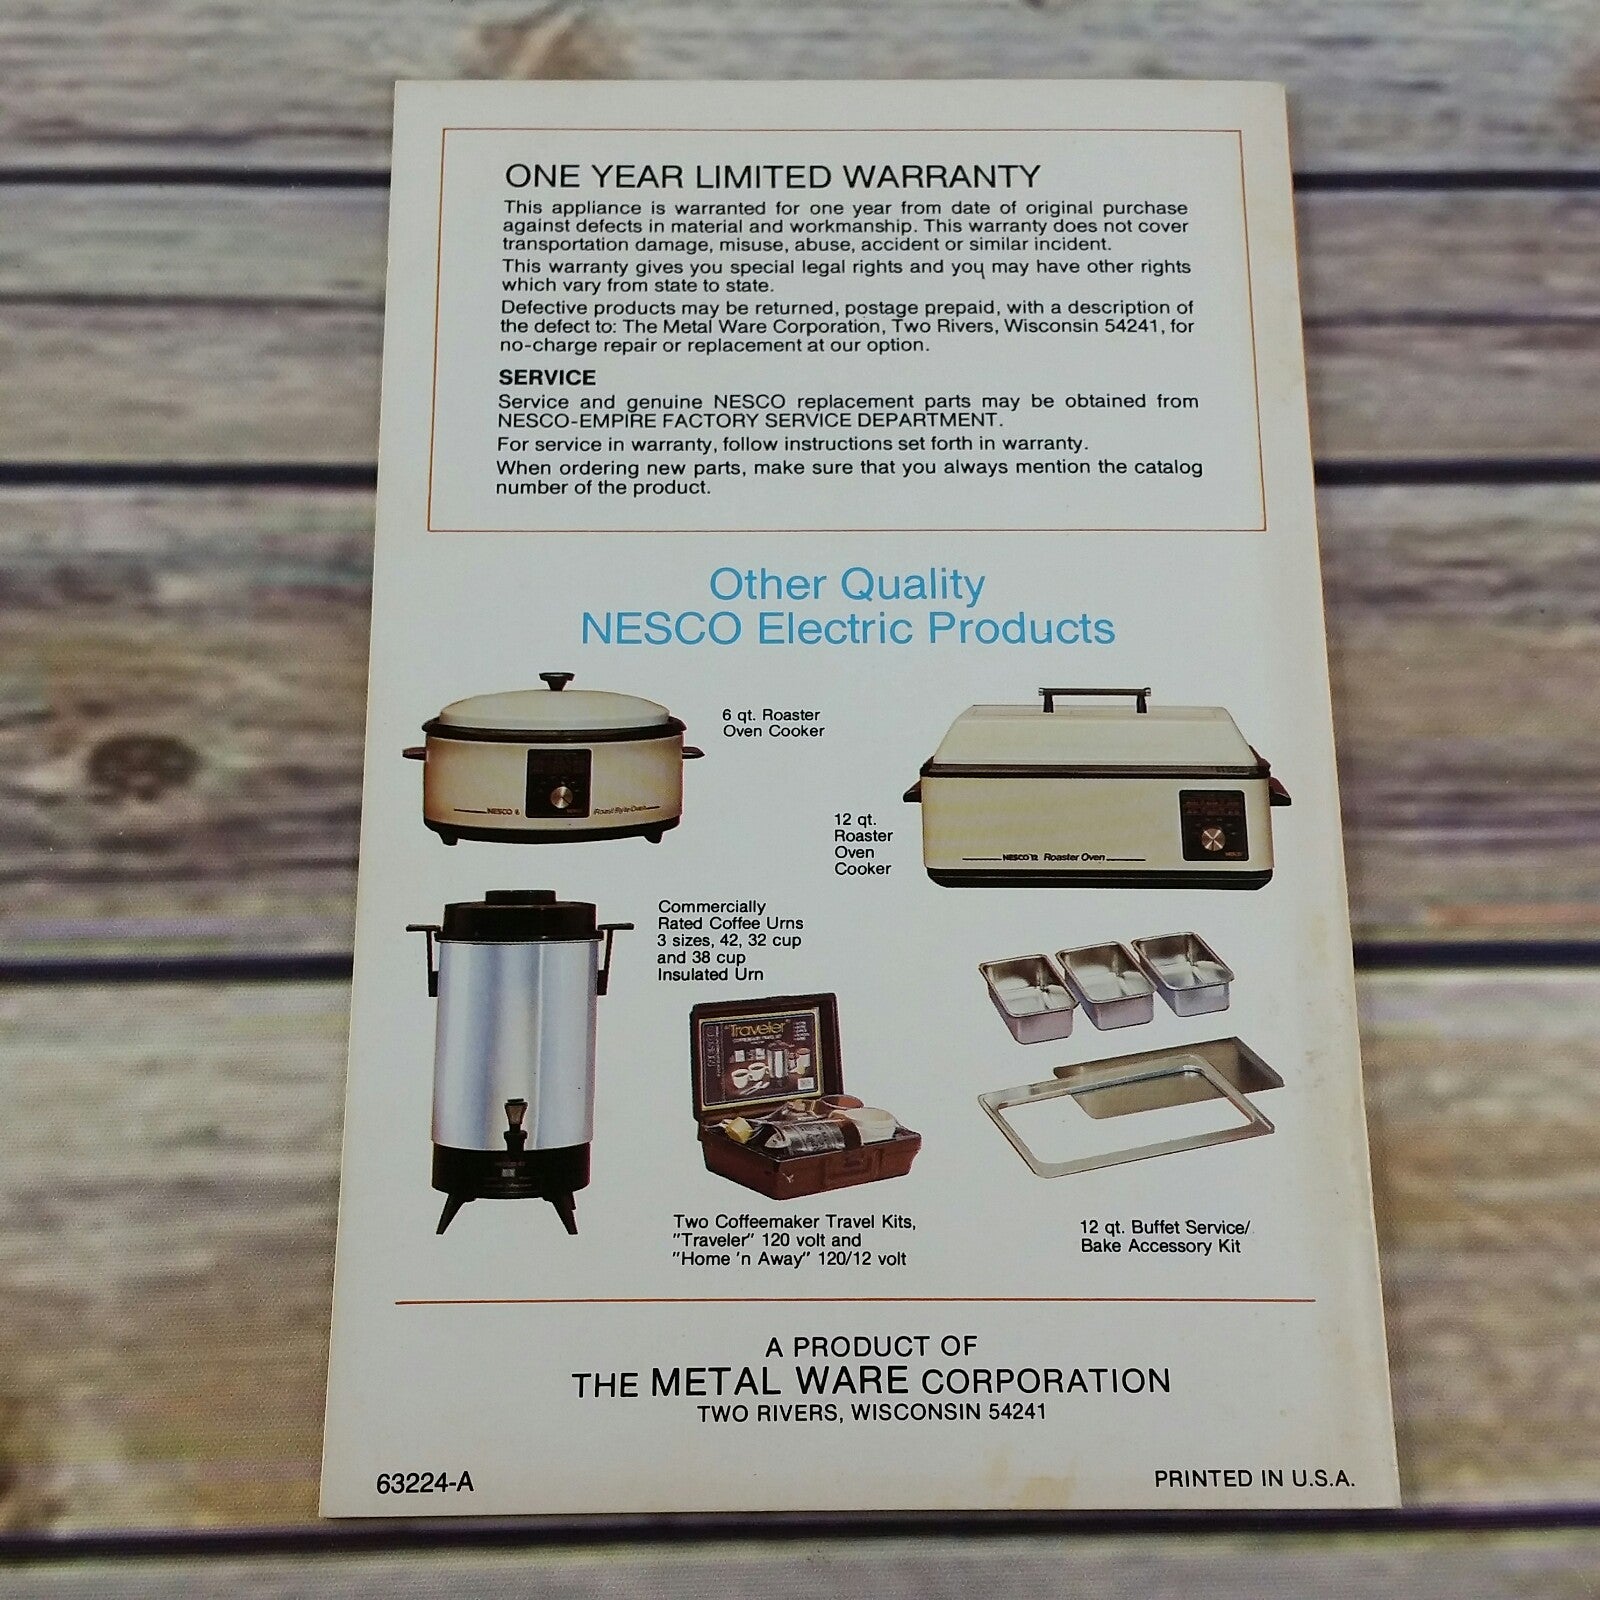 Vintage Cookbook Nesco Portable Electric 4 qt Roaster Oven Cooking Recipes Promo 1970s 1980s Manual Booklet Instructions - At Grandma's Table